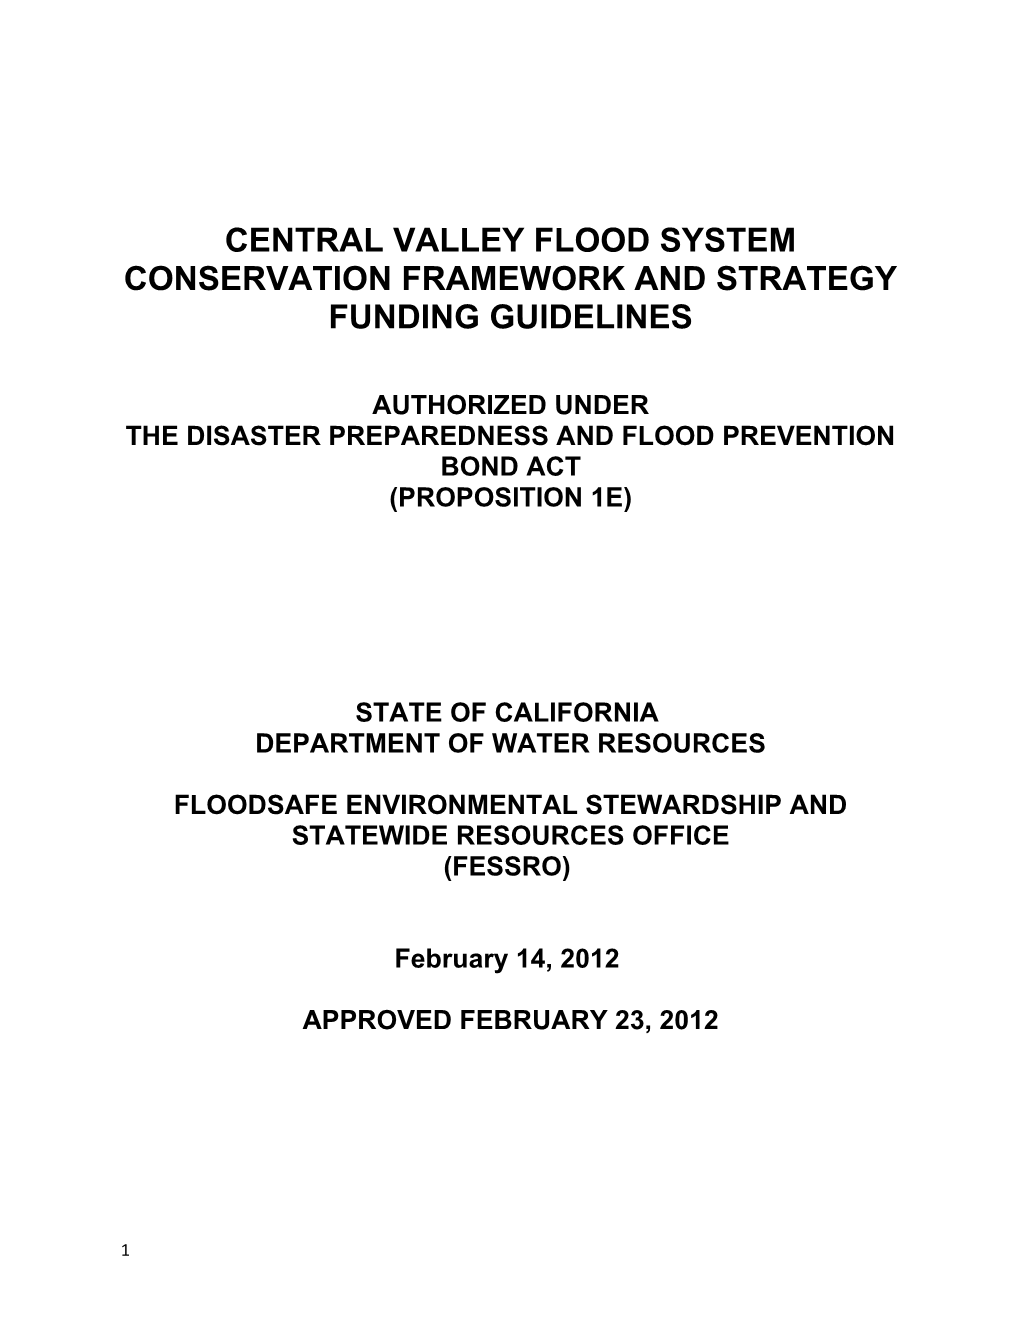 Central Valley Flood System Conservation Framework and Strategy